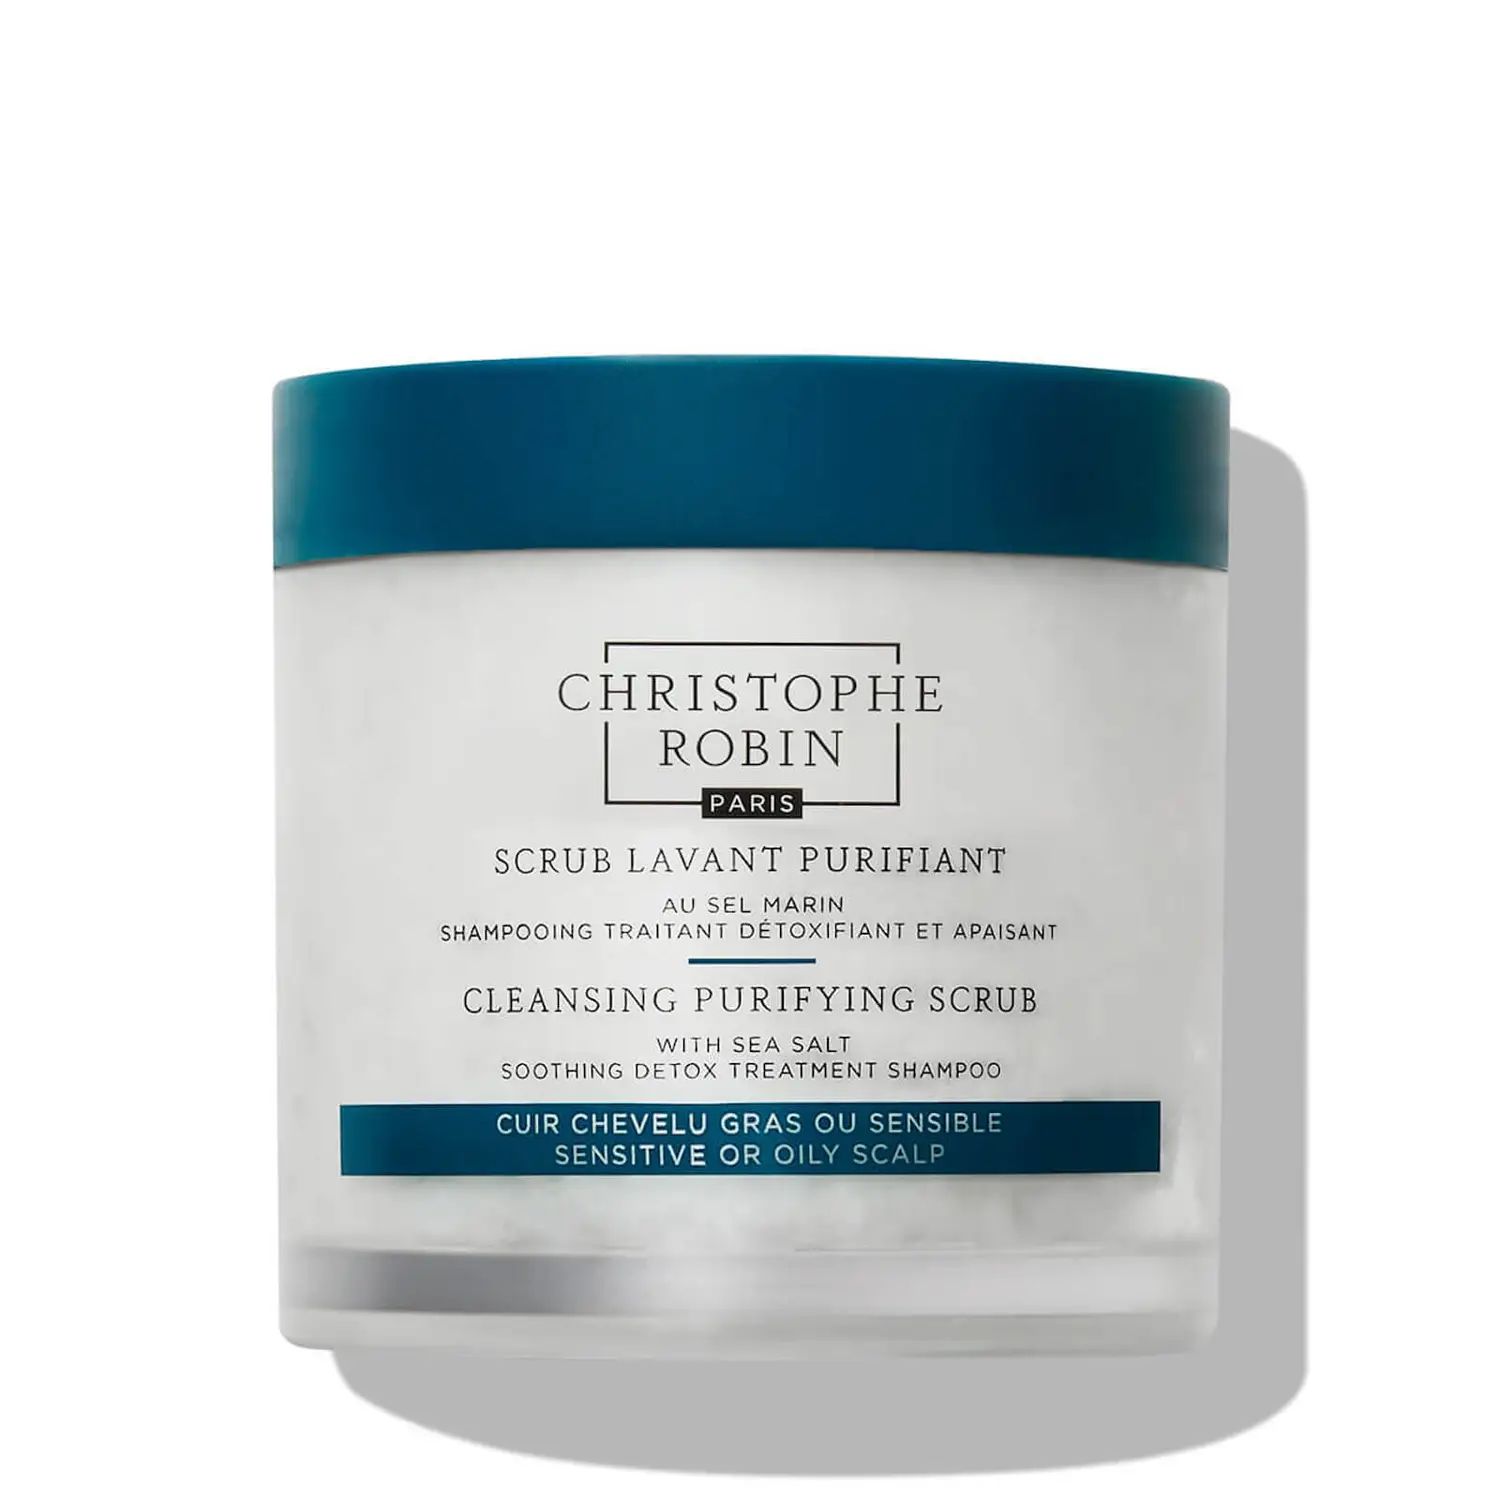 Christophe Robin Cleansing Purifying Scrub with Sea Salt 250ml | Skinstore